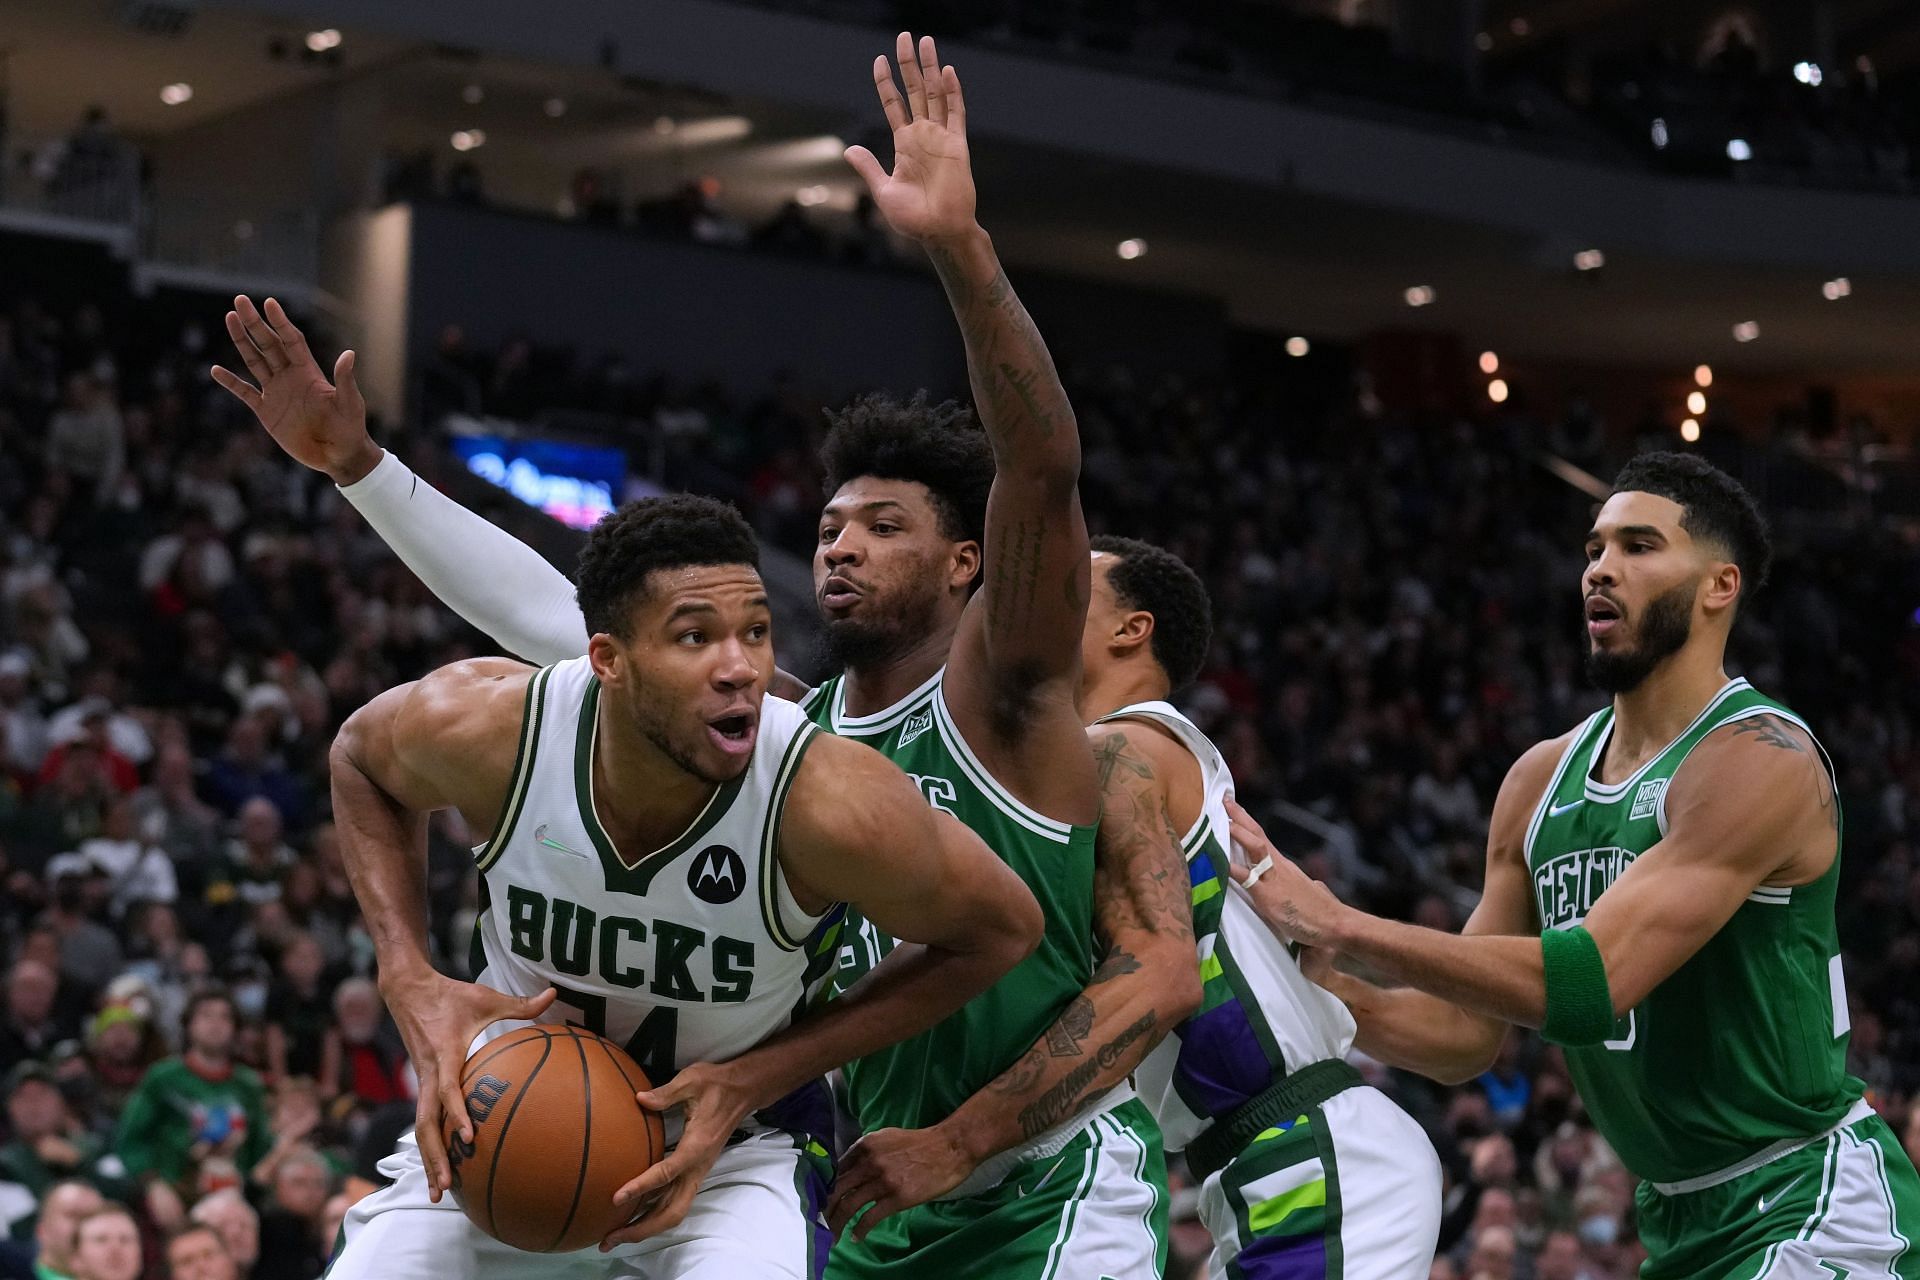 Marcus Smart challenging Giannis Antetokounmpo on Christmas Day match-up